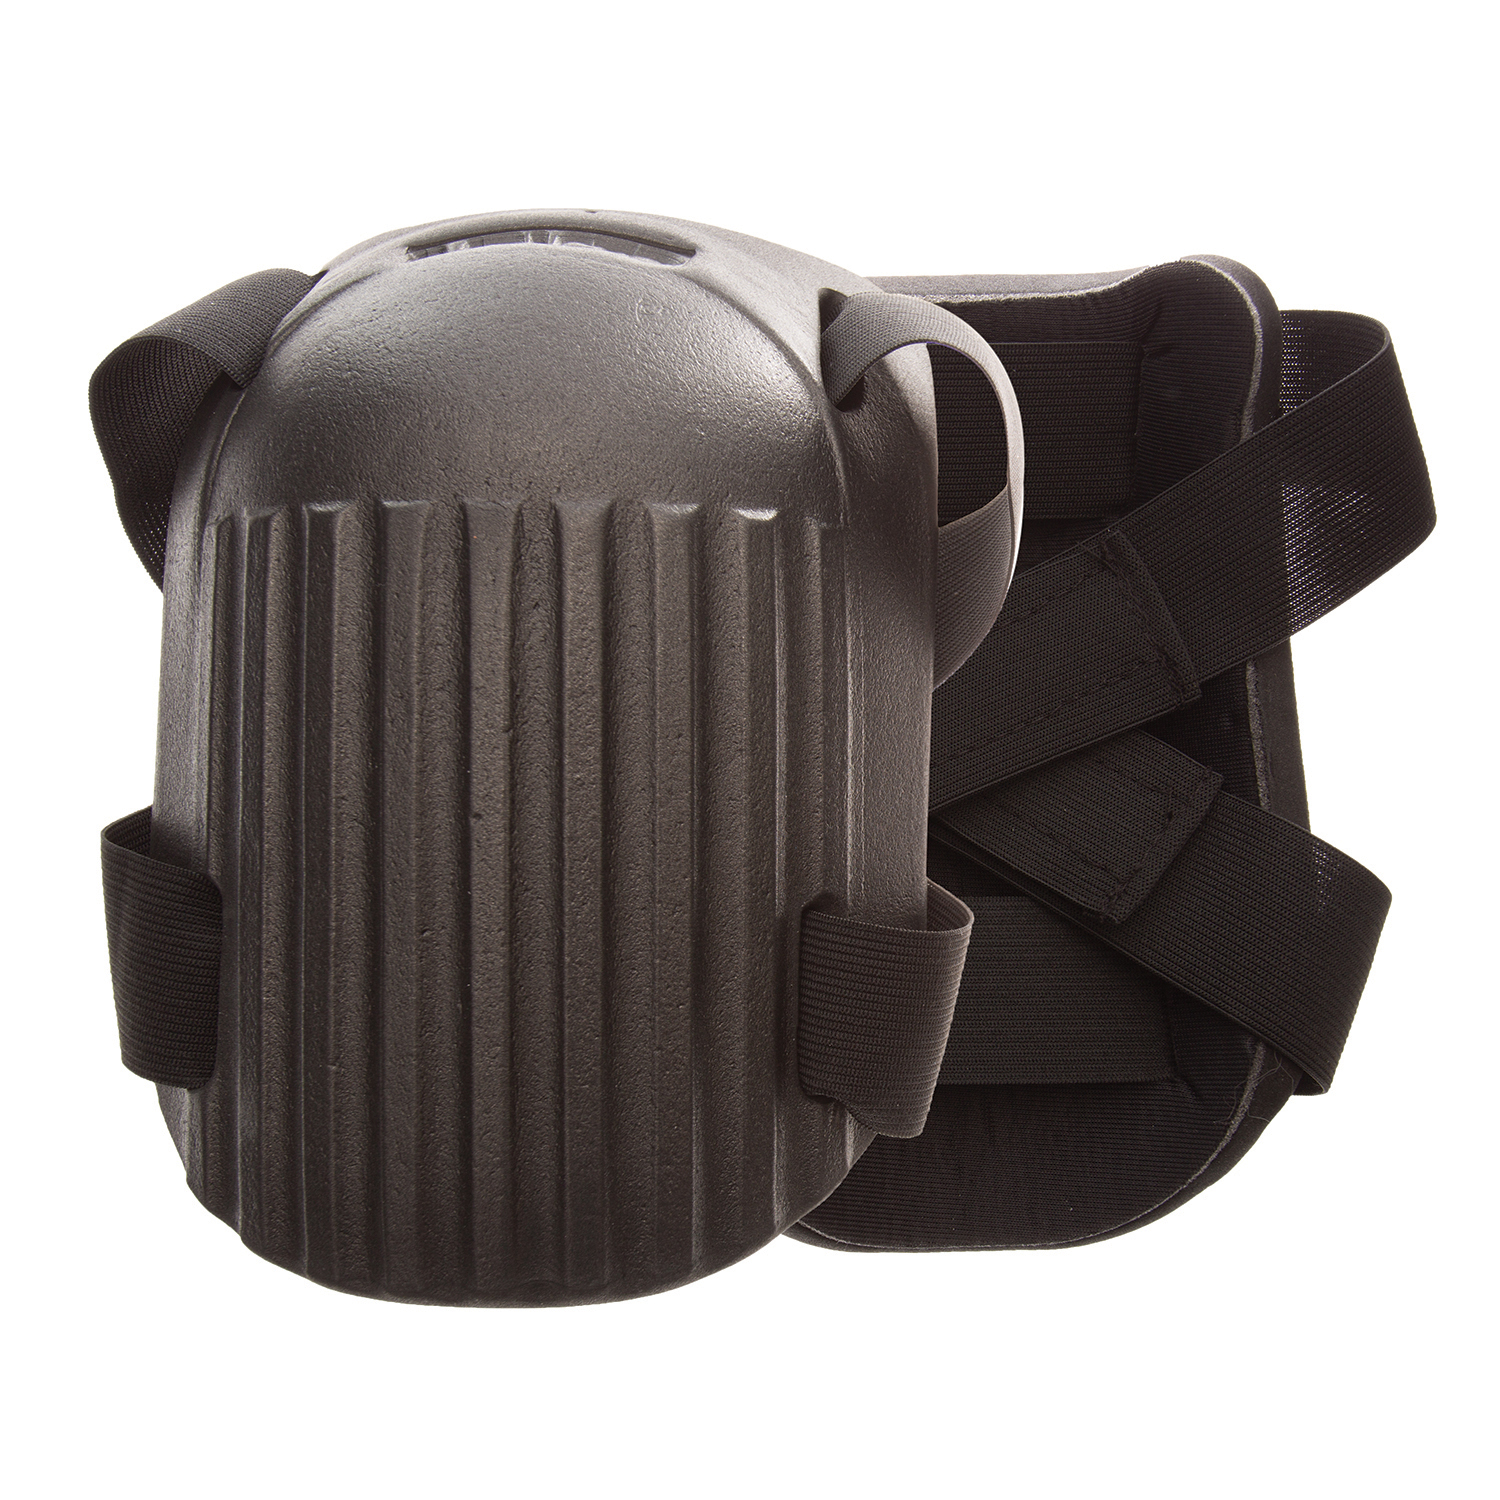 IMPACTO 845-00 KNEE PAD ULTIMATE MOLDED WING - Knee Supports